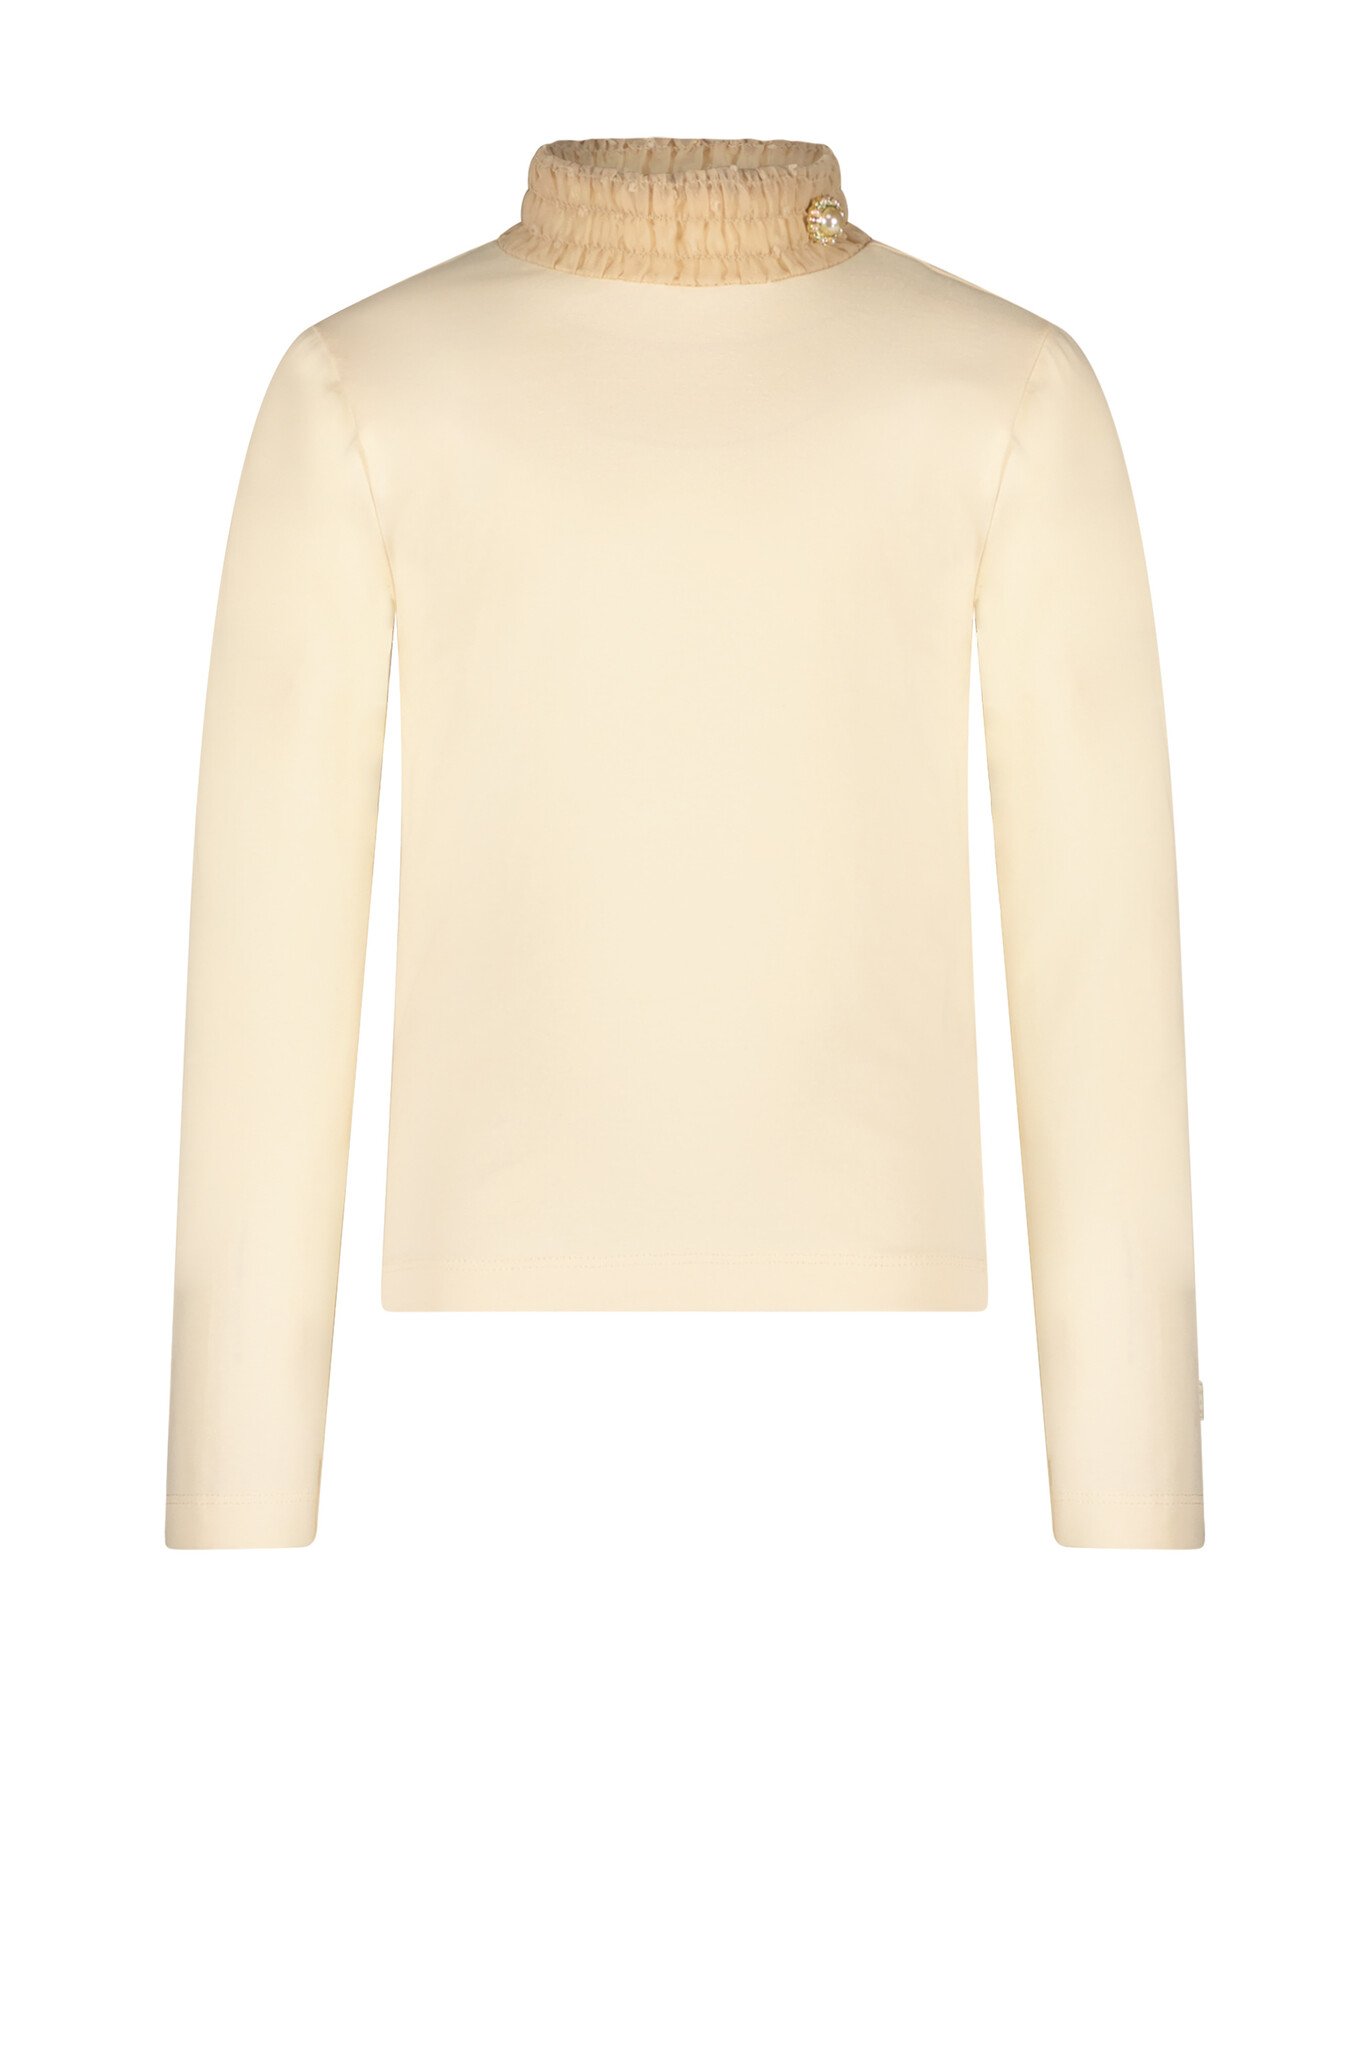 Le Chic C308-5420 Meisjes T-shirt - Pearled Ivory - Maat 152